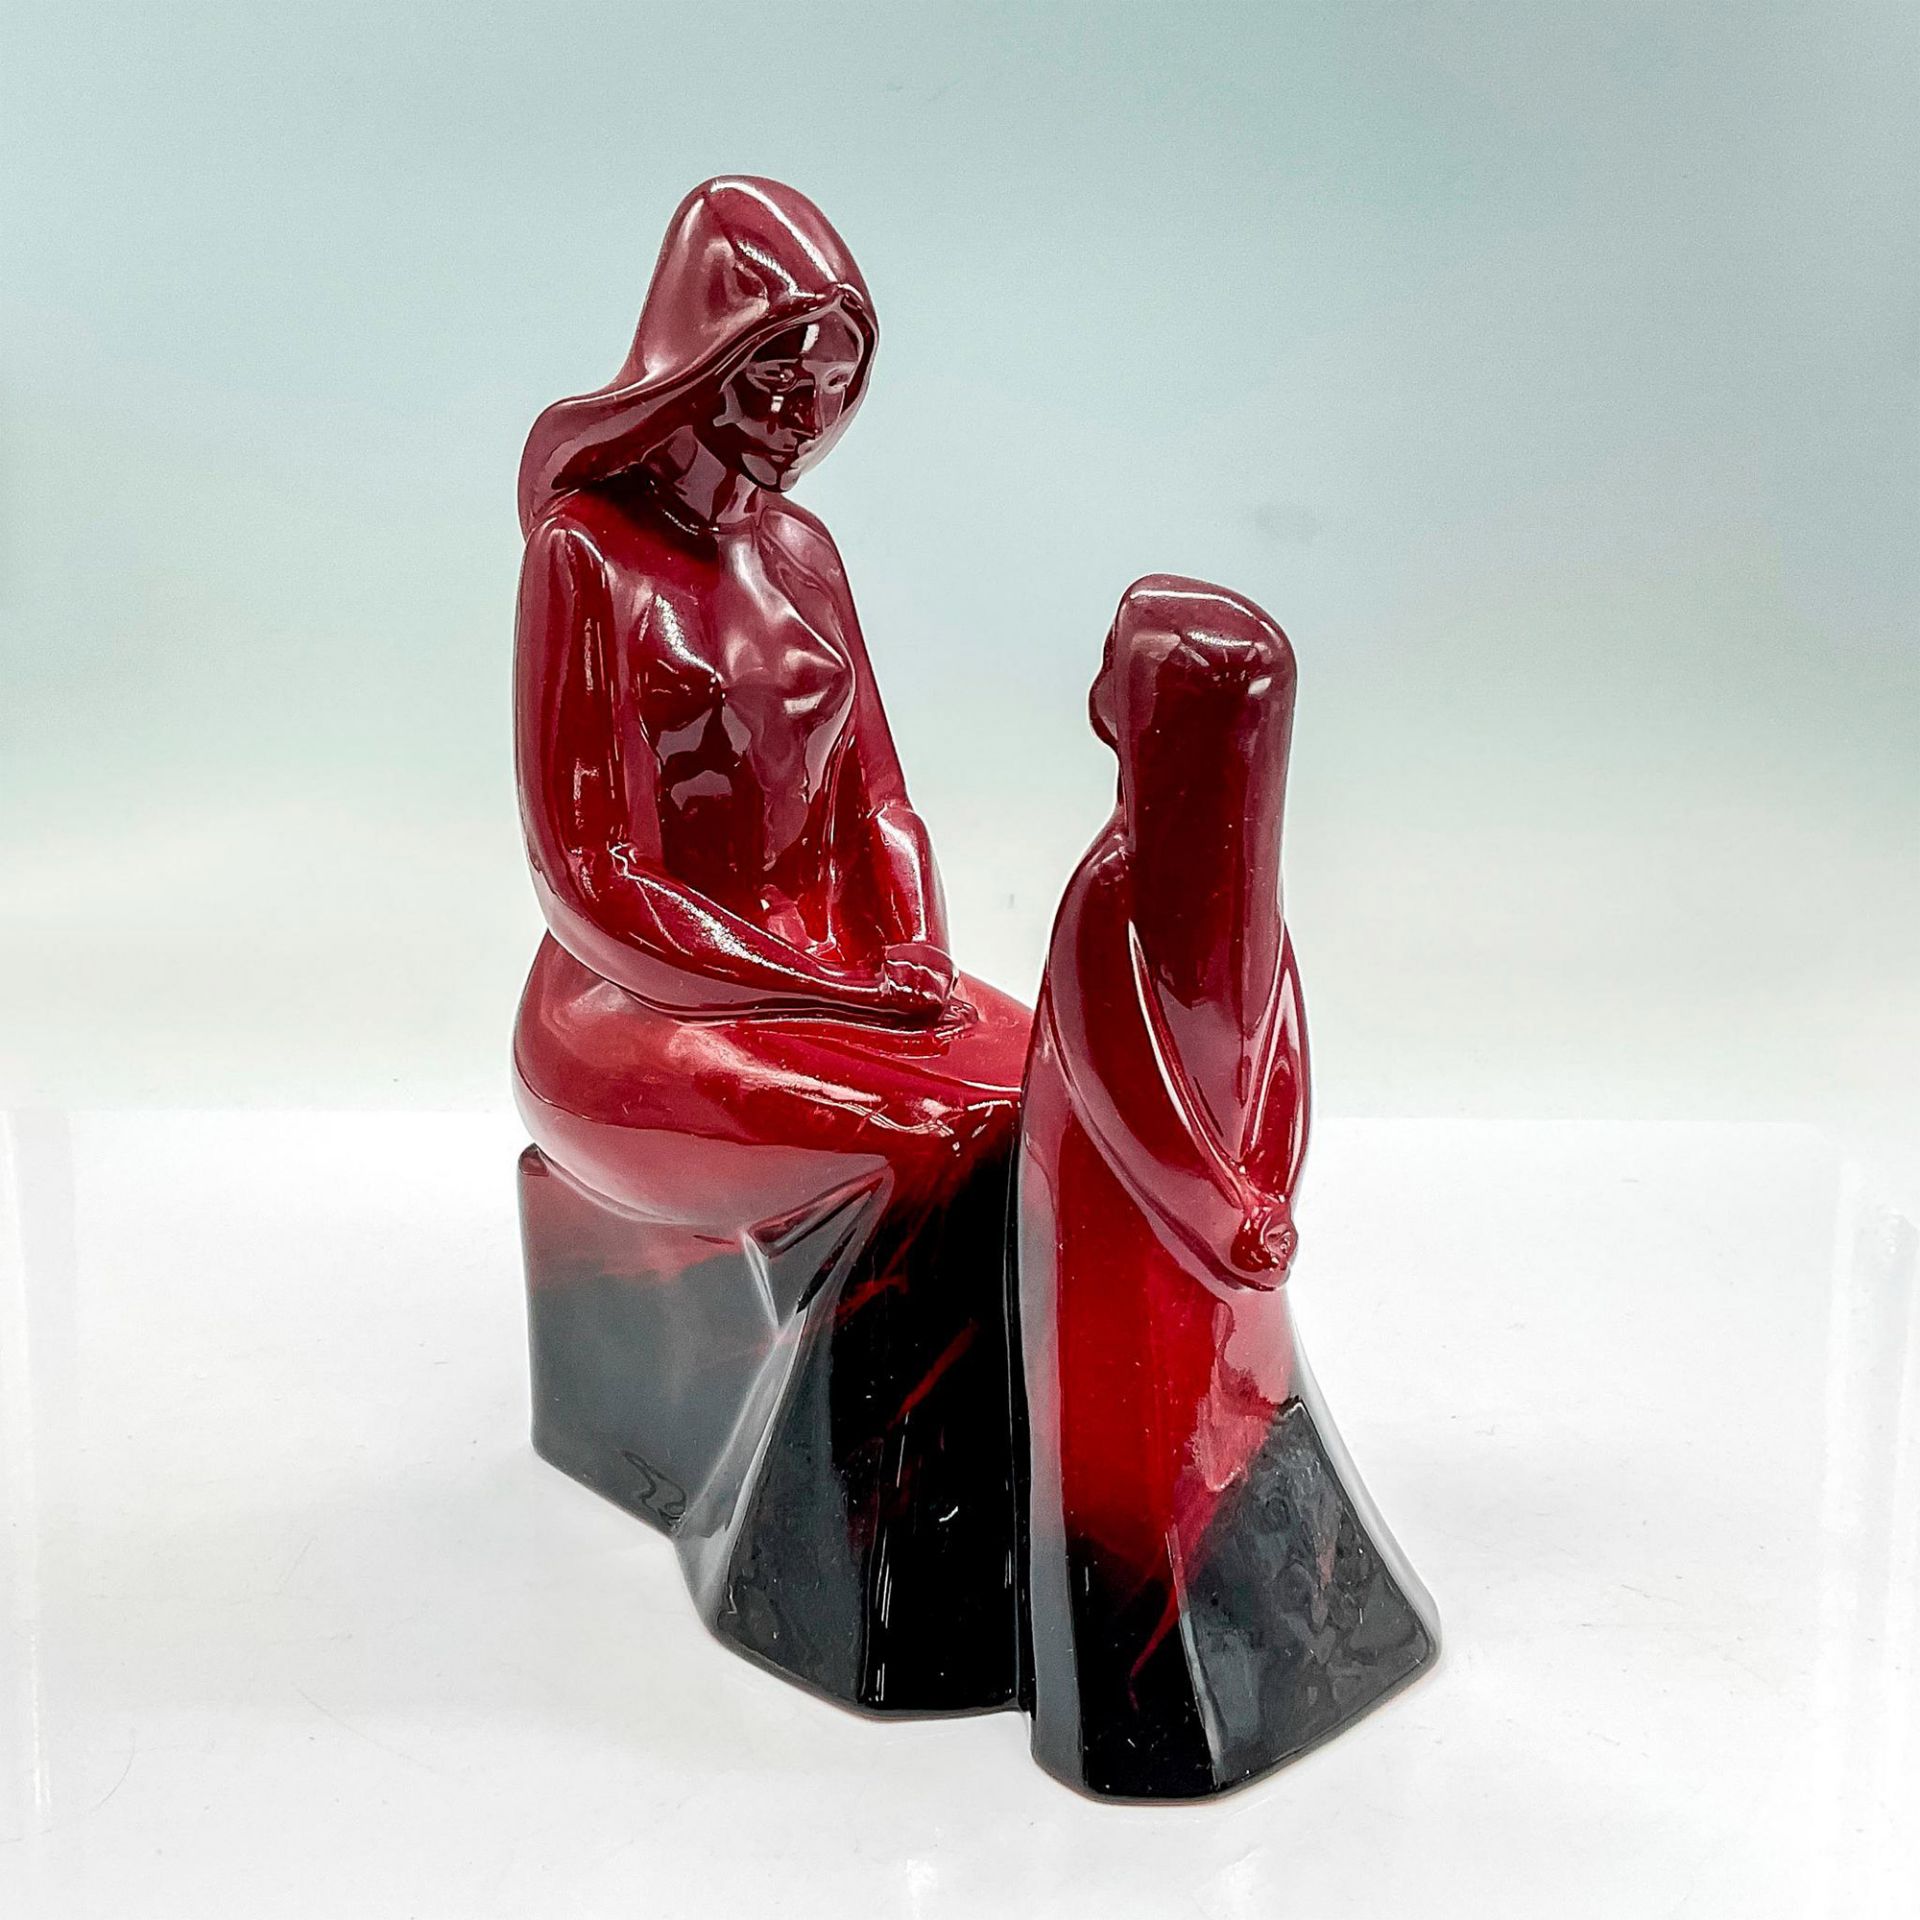 Mother and Daughter - Royal Doulton Flambe Prototype Figurine - Image 2 of 4